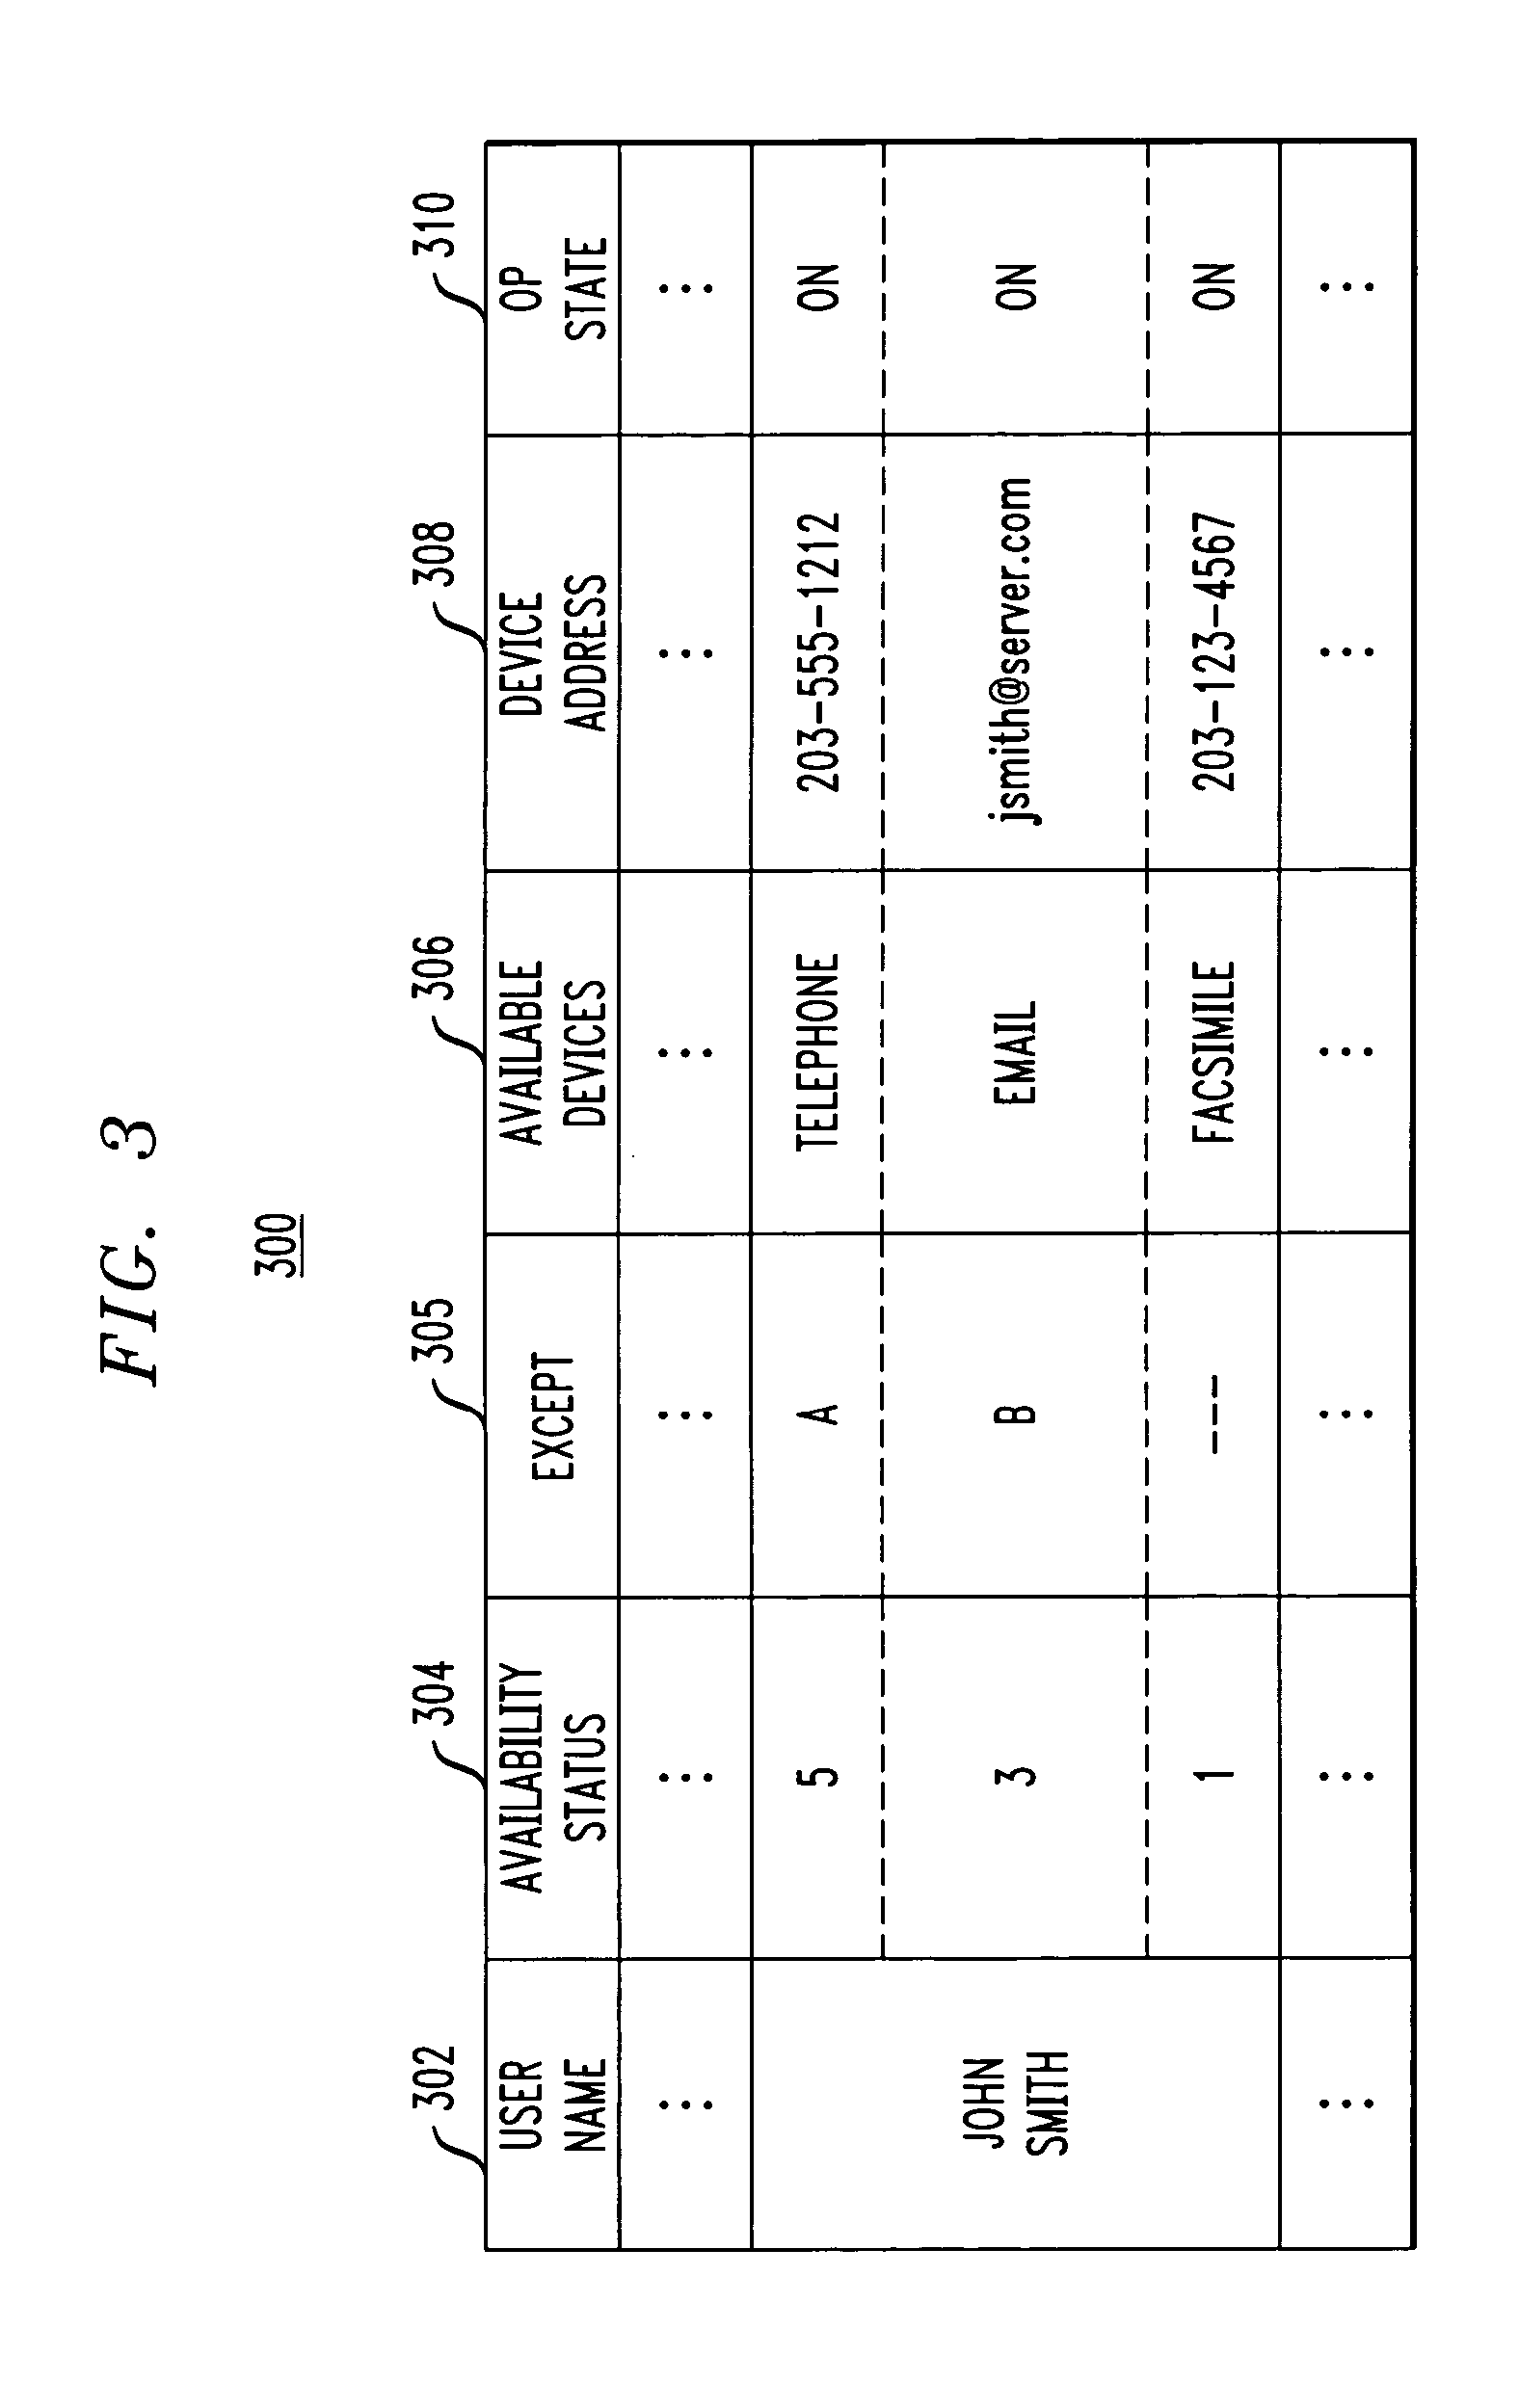 System and method for providing availability information to a user